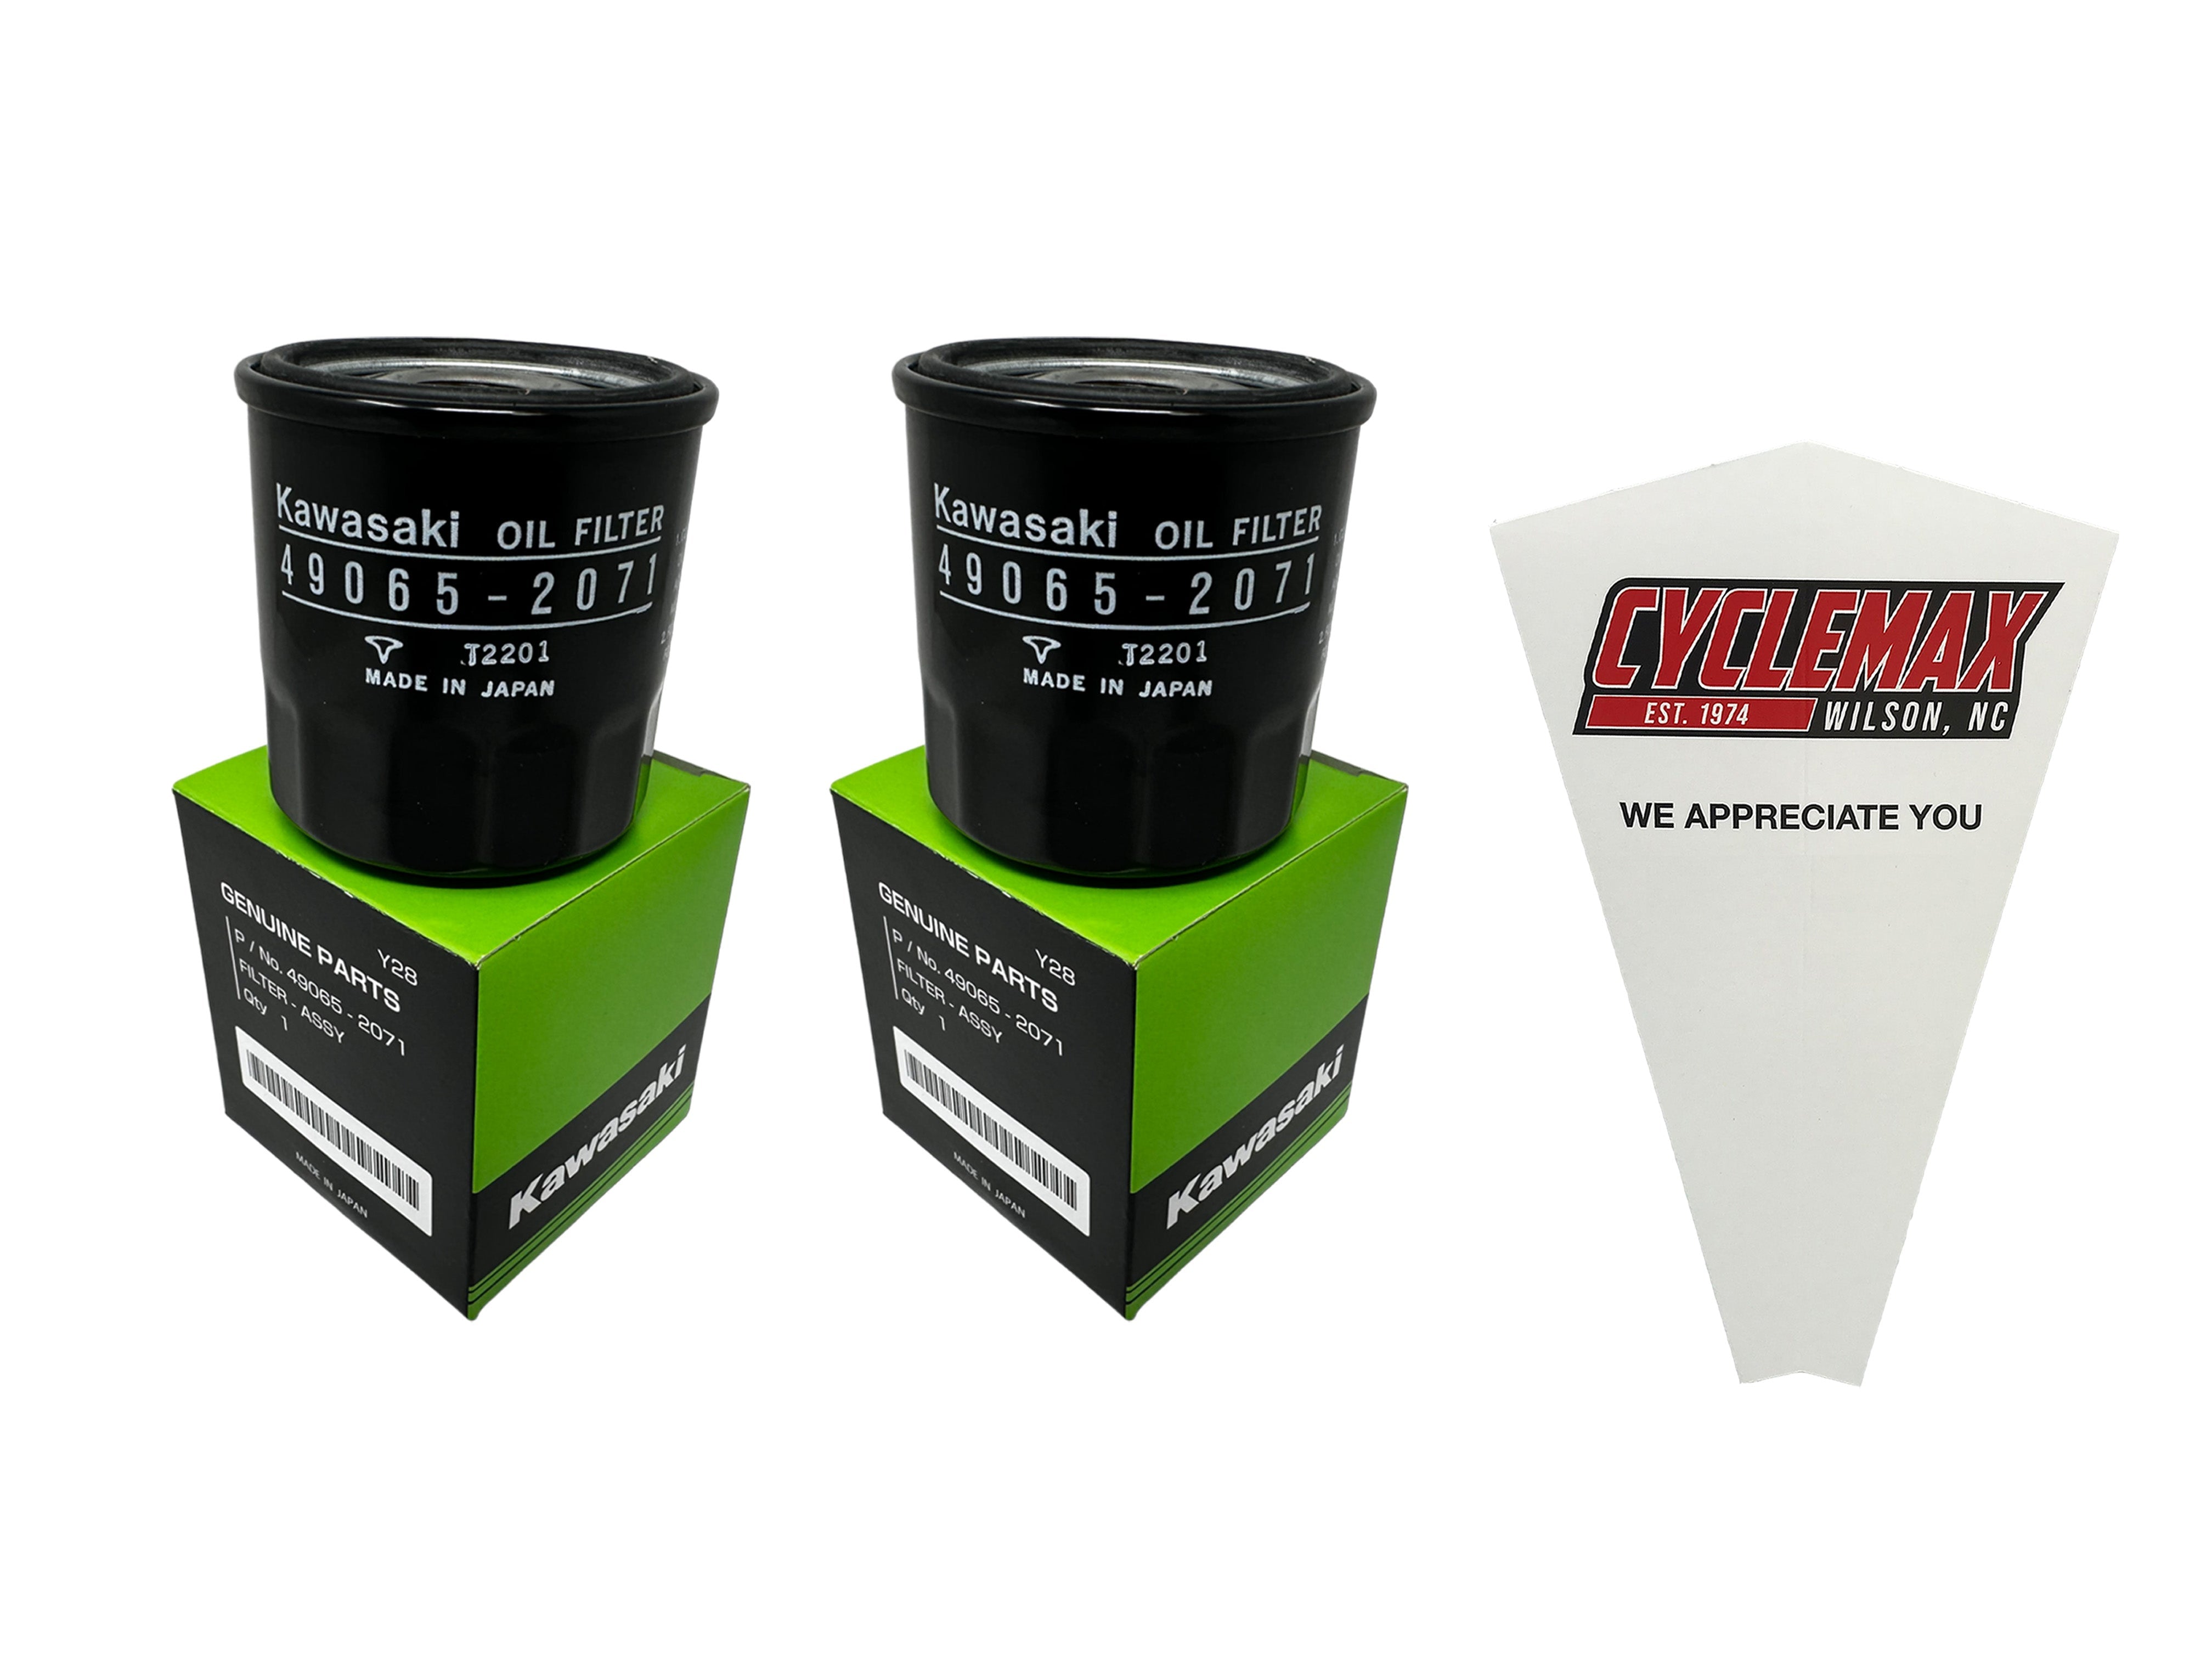 Cyclemax Two Pack for Kawasaki Oil Filter 49065-2071 Contains Two Filters and a Funnel